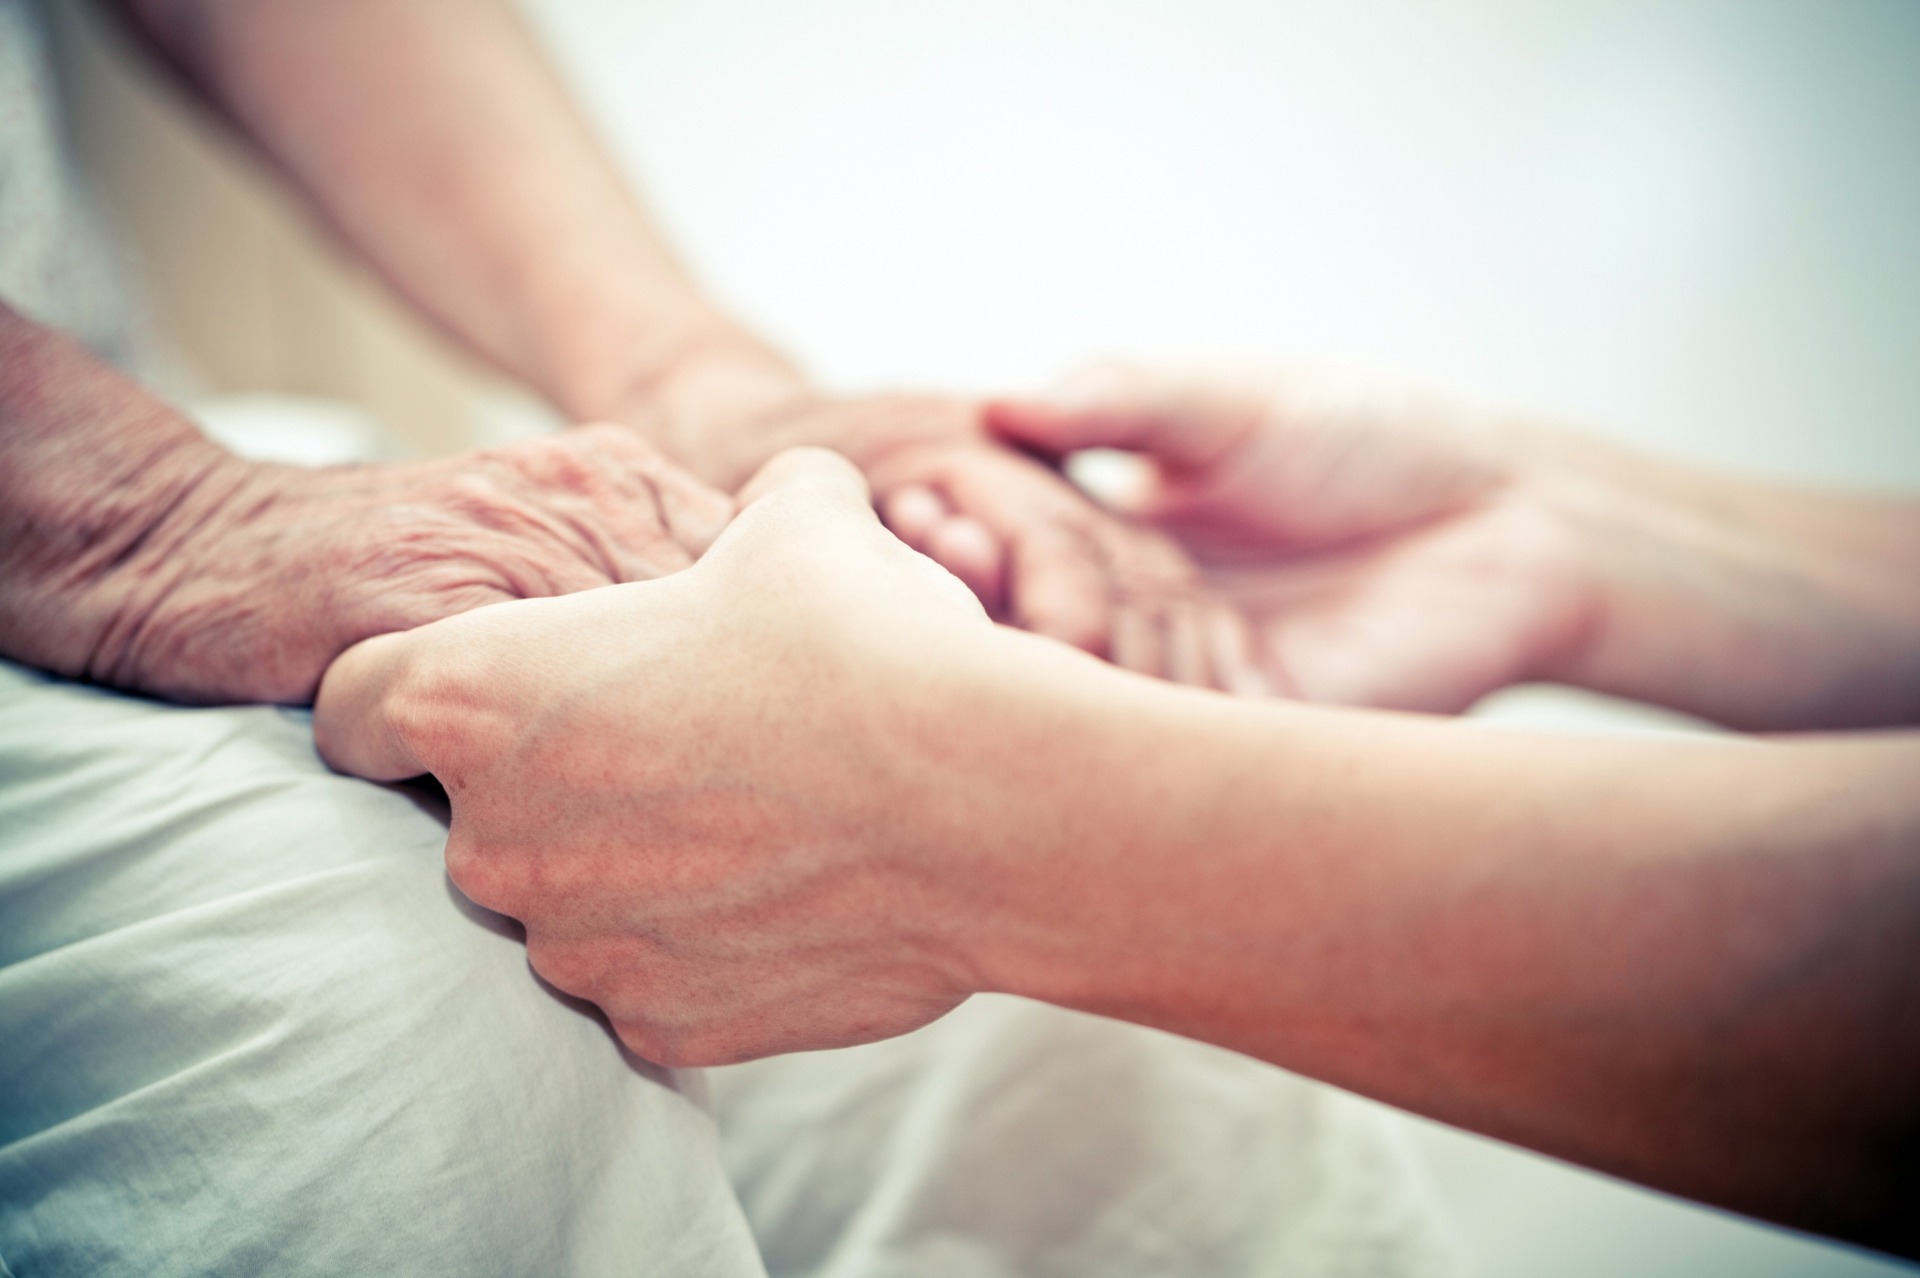 Does Your Bereavement Program Make the Cut? 